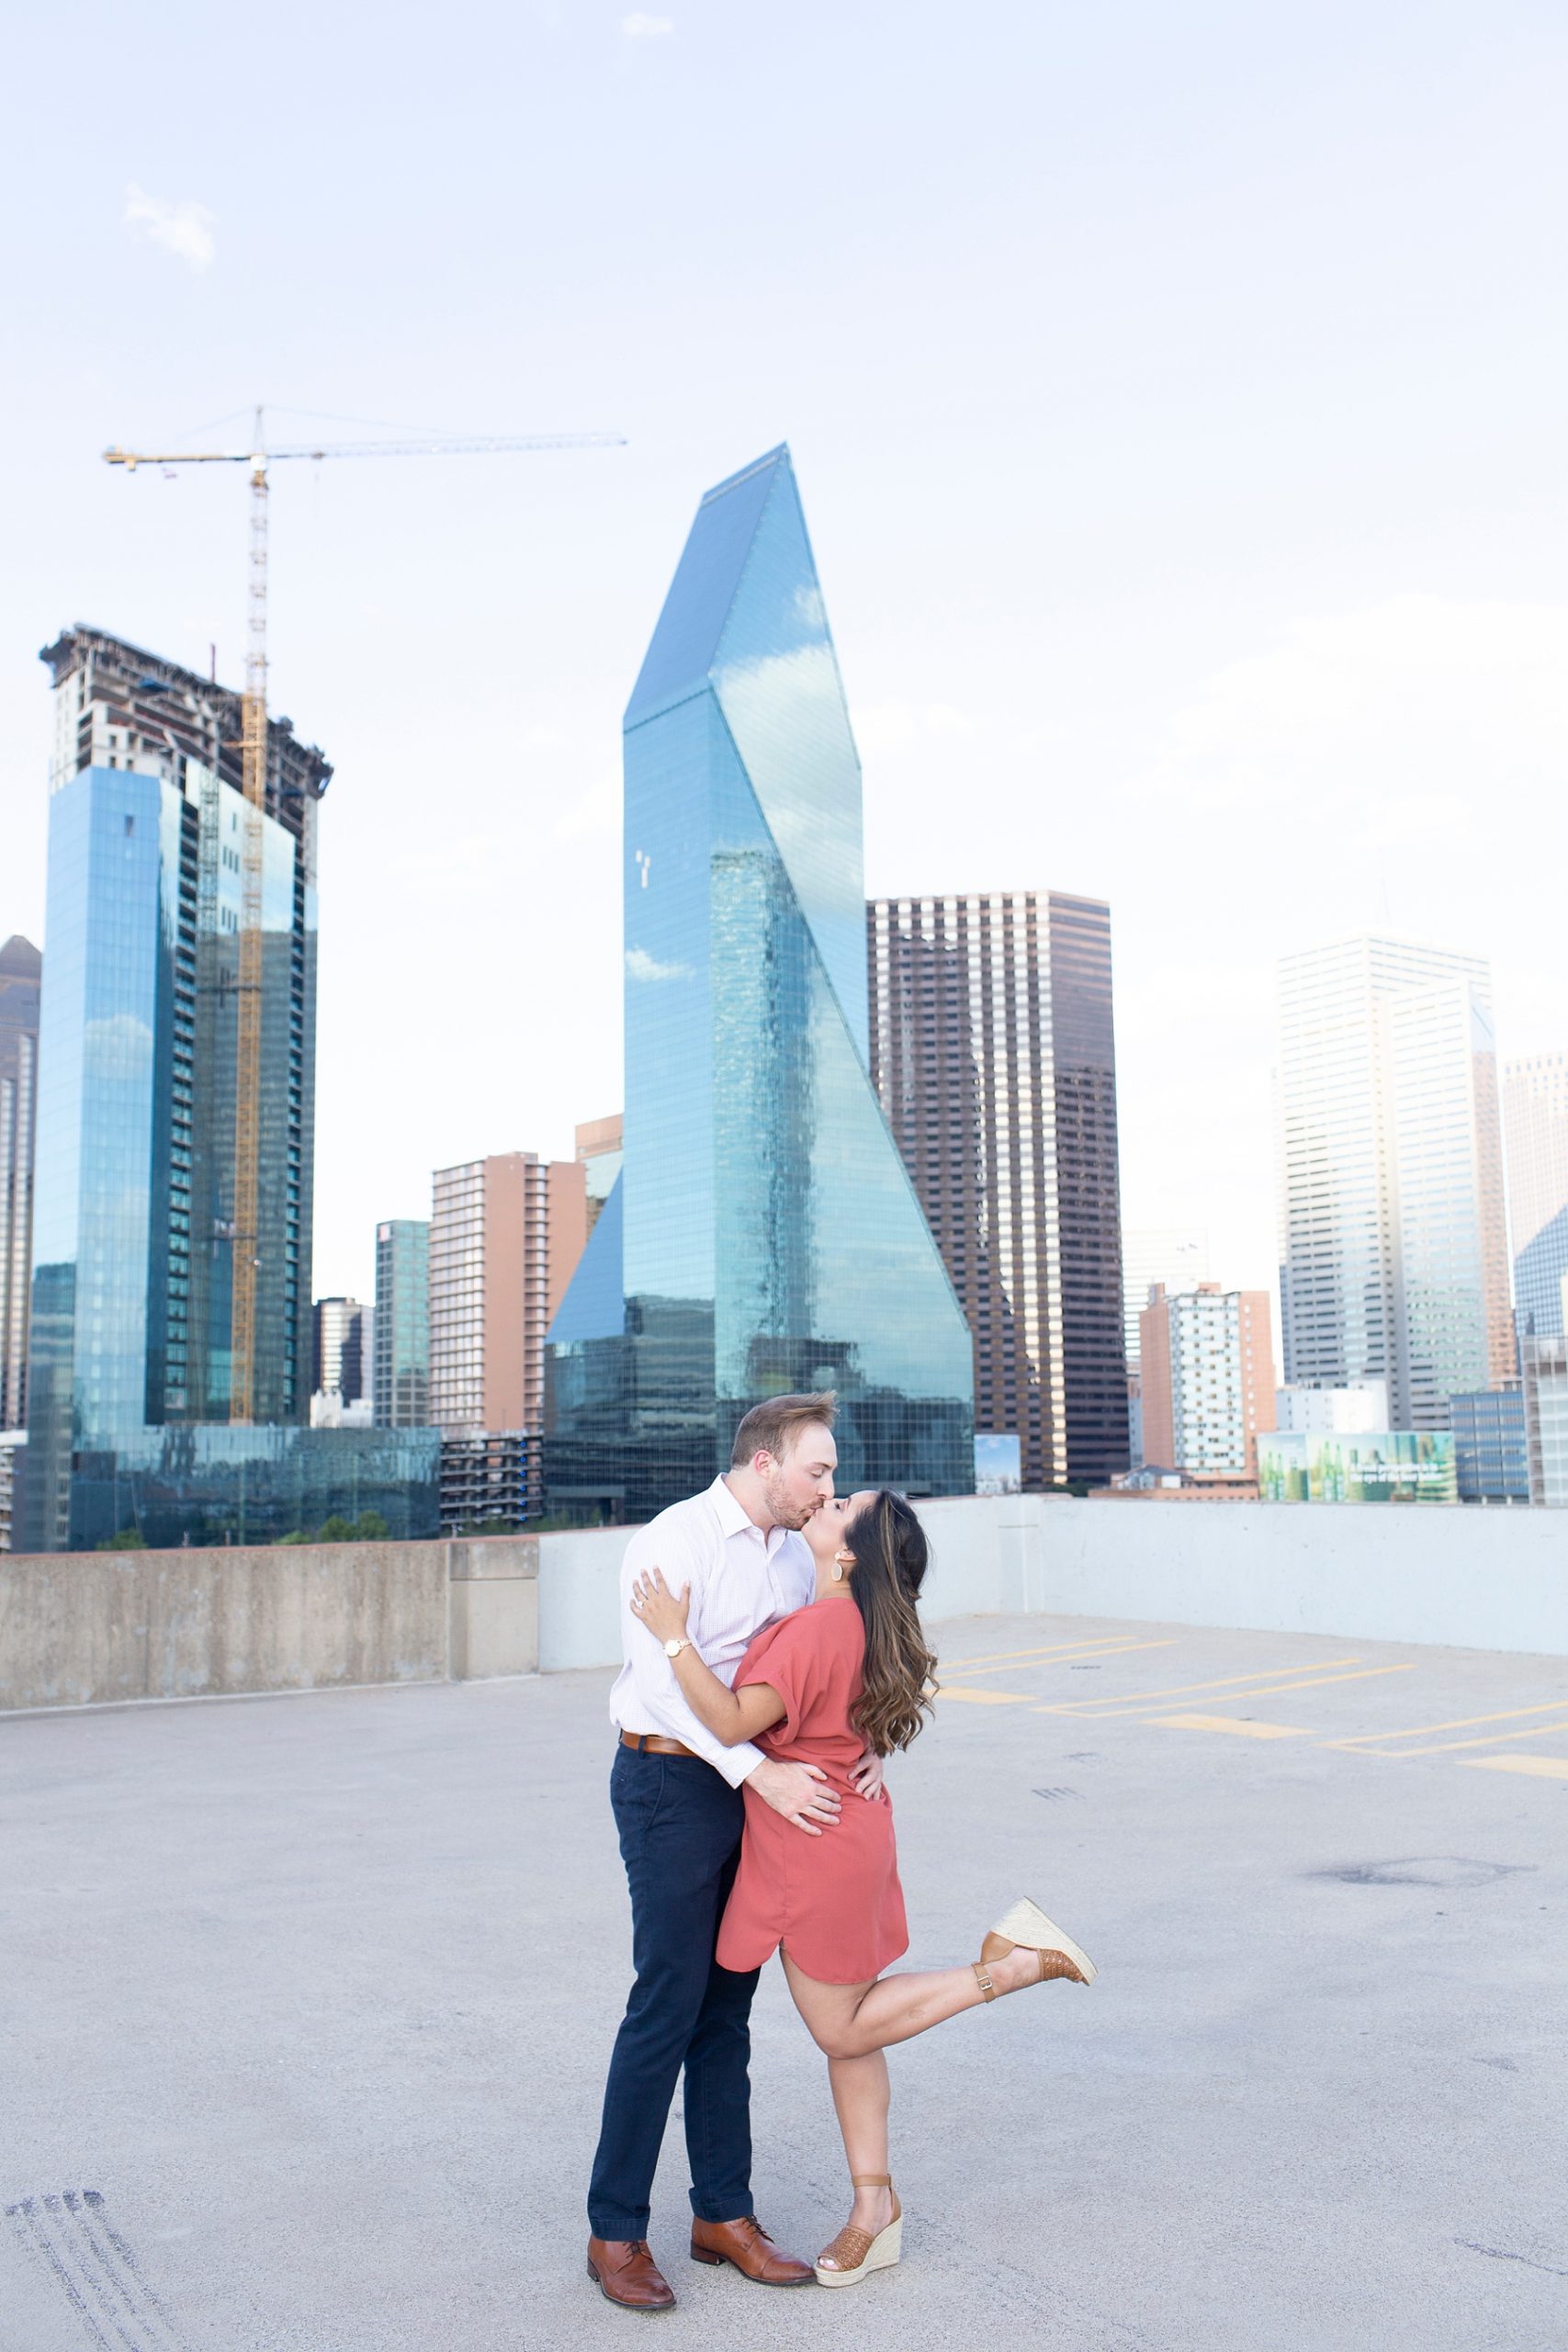 engaged couple poses in front of Dallas icons photographed by Randi Michelle Weddings